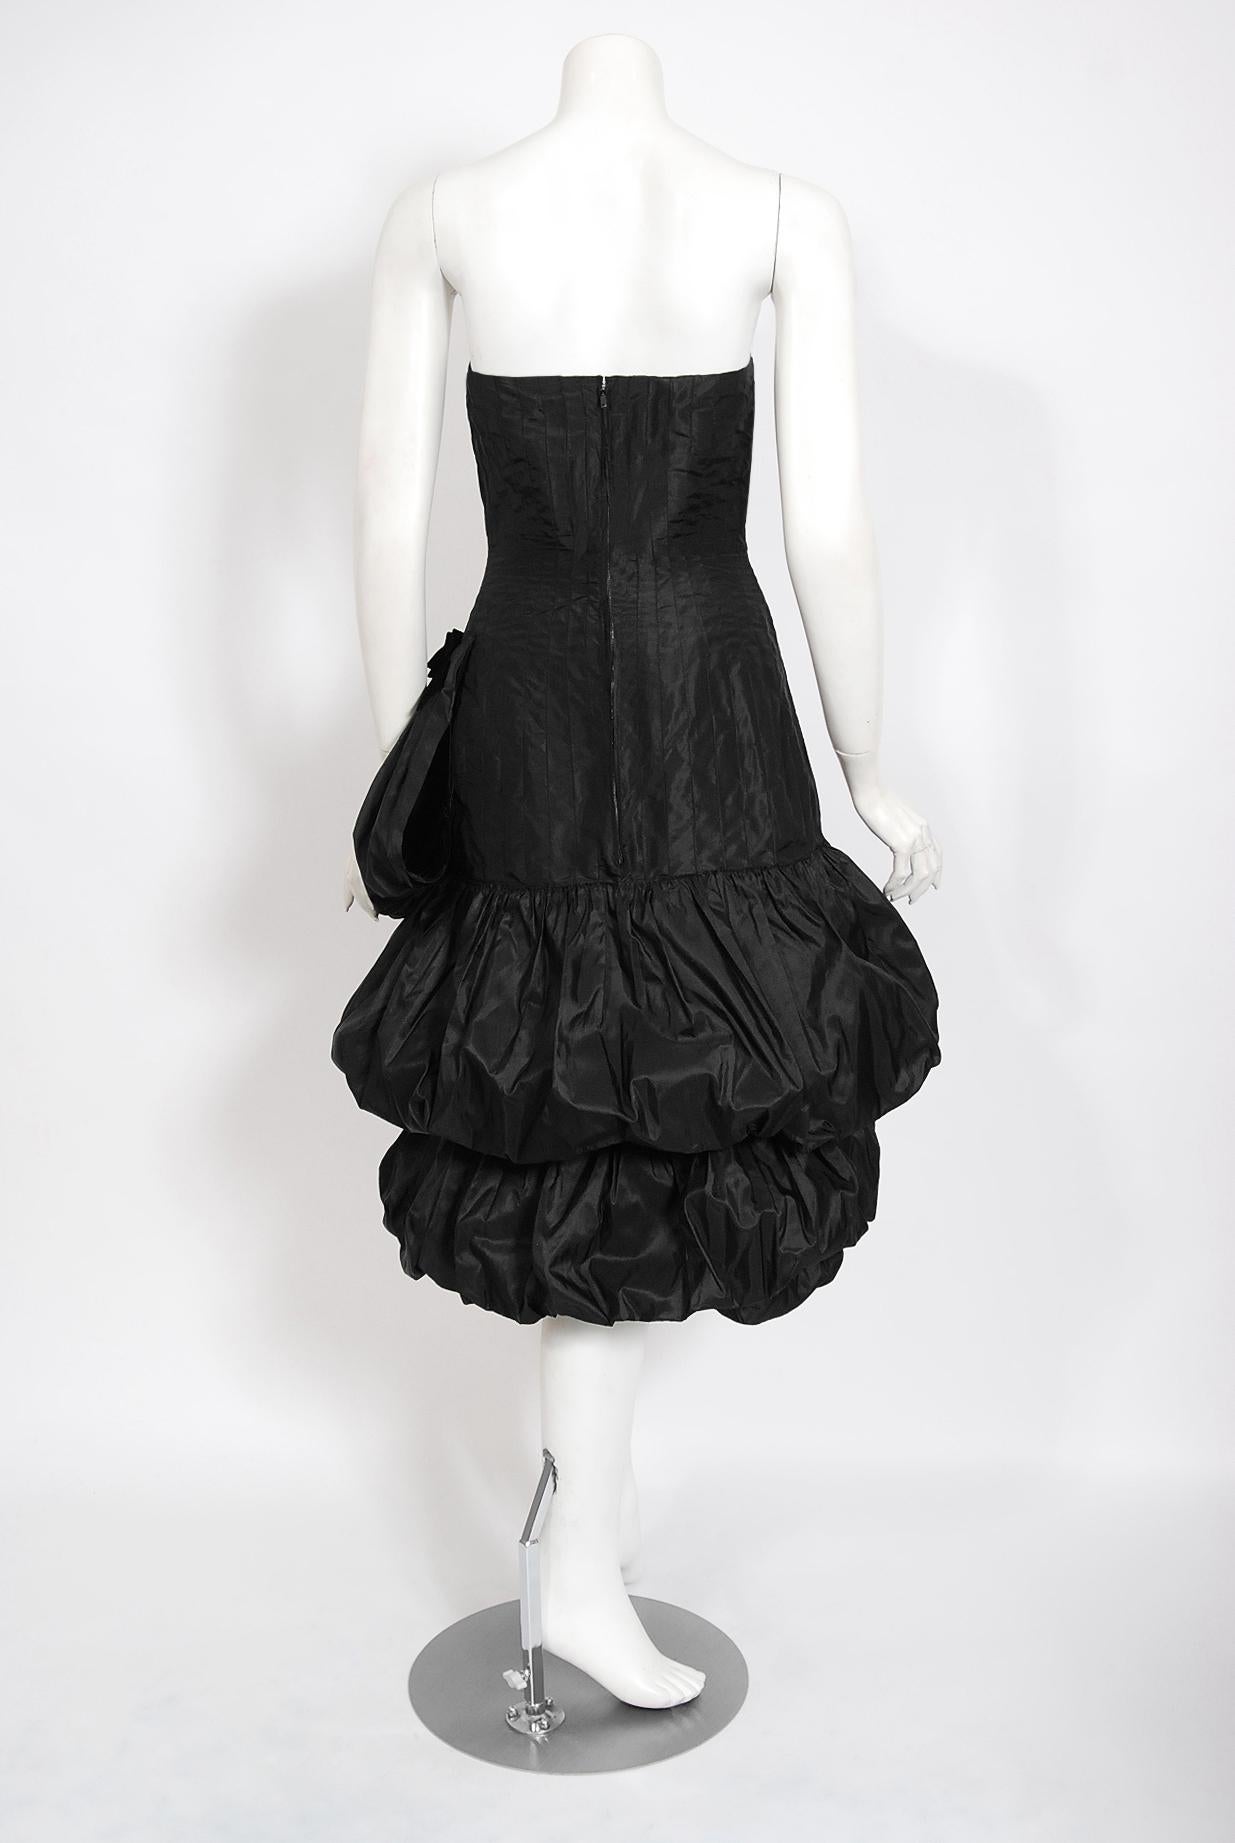 Vintage 1959 Bruxelles Couture Black Taffeta Tiered-Puff Strapless Dress  2